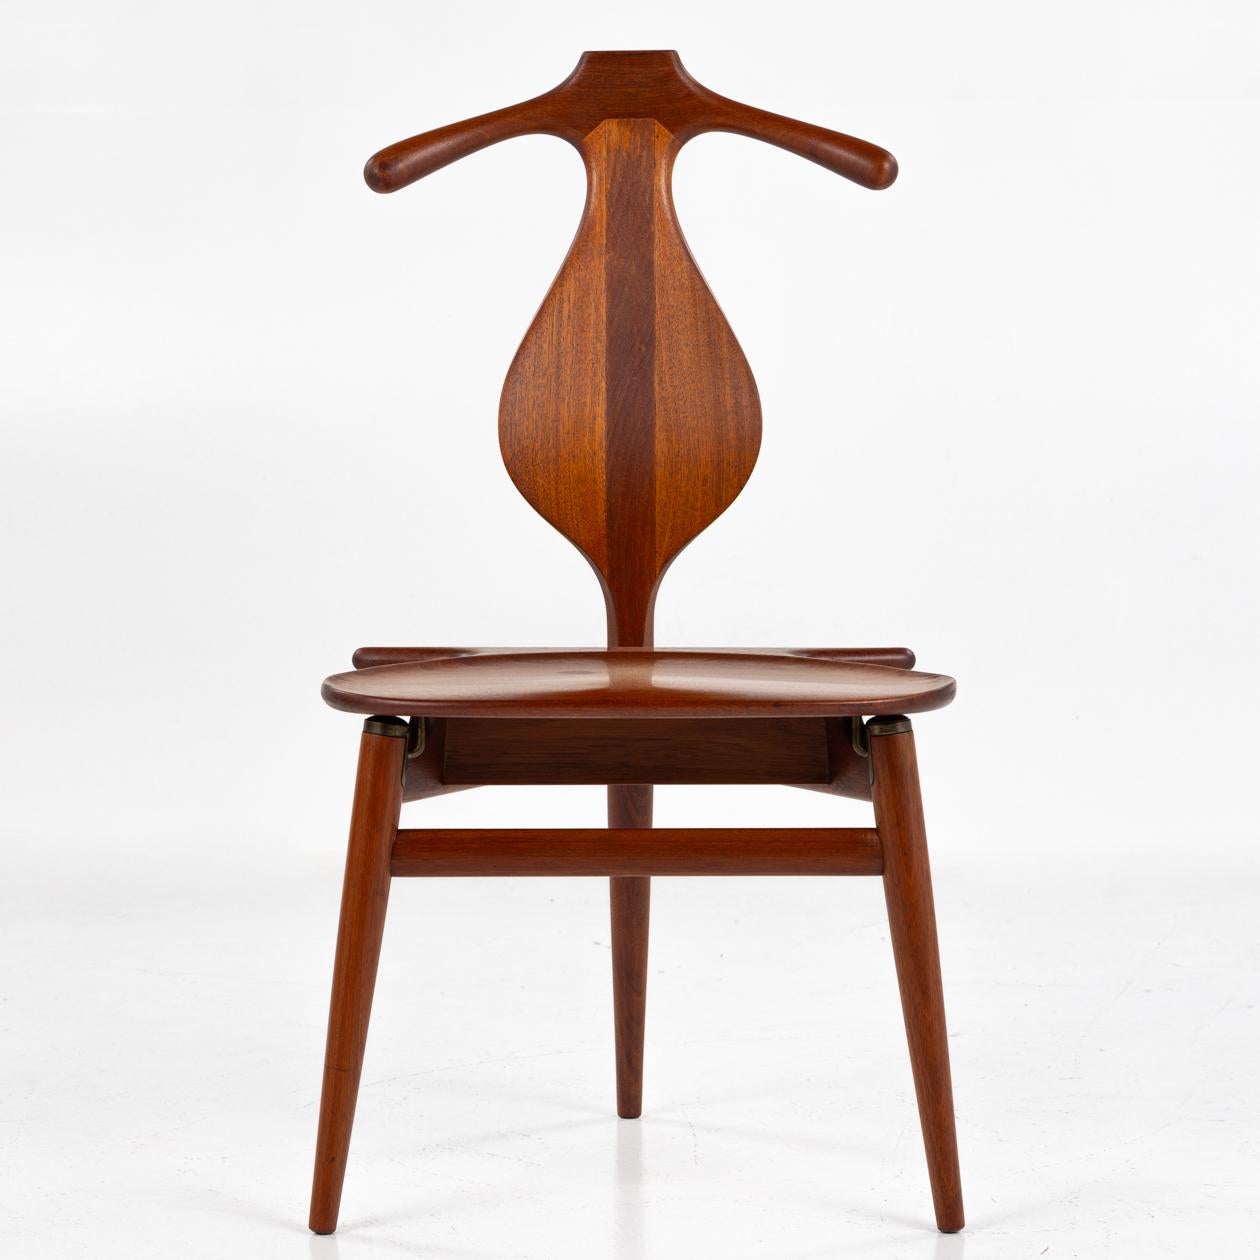 JH 540 - The Valet Chair or the 'Bachelor's Chair' in solid mahogany. Stamped from the manufacturer. Did you know that King Frederik IX himself acquired one of the chairs when it was shown at the Cabinetmakers' Guild Exhibition in 1953?